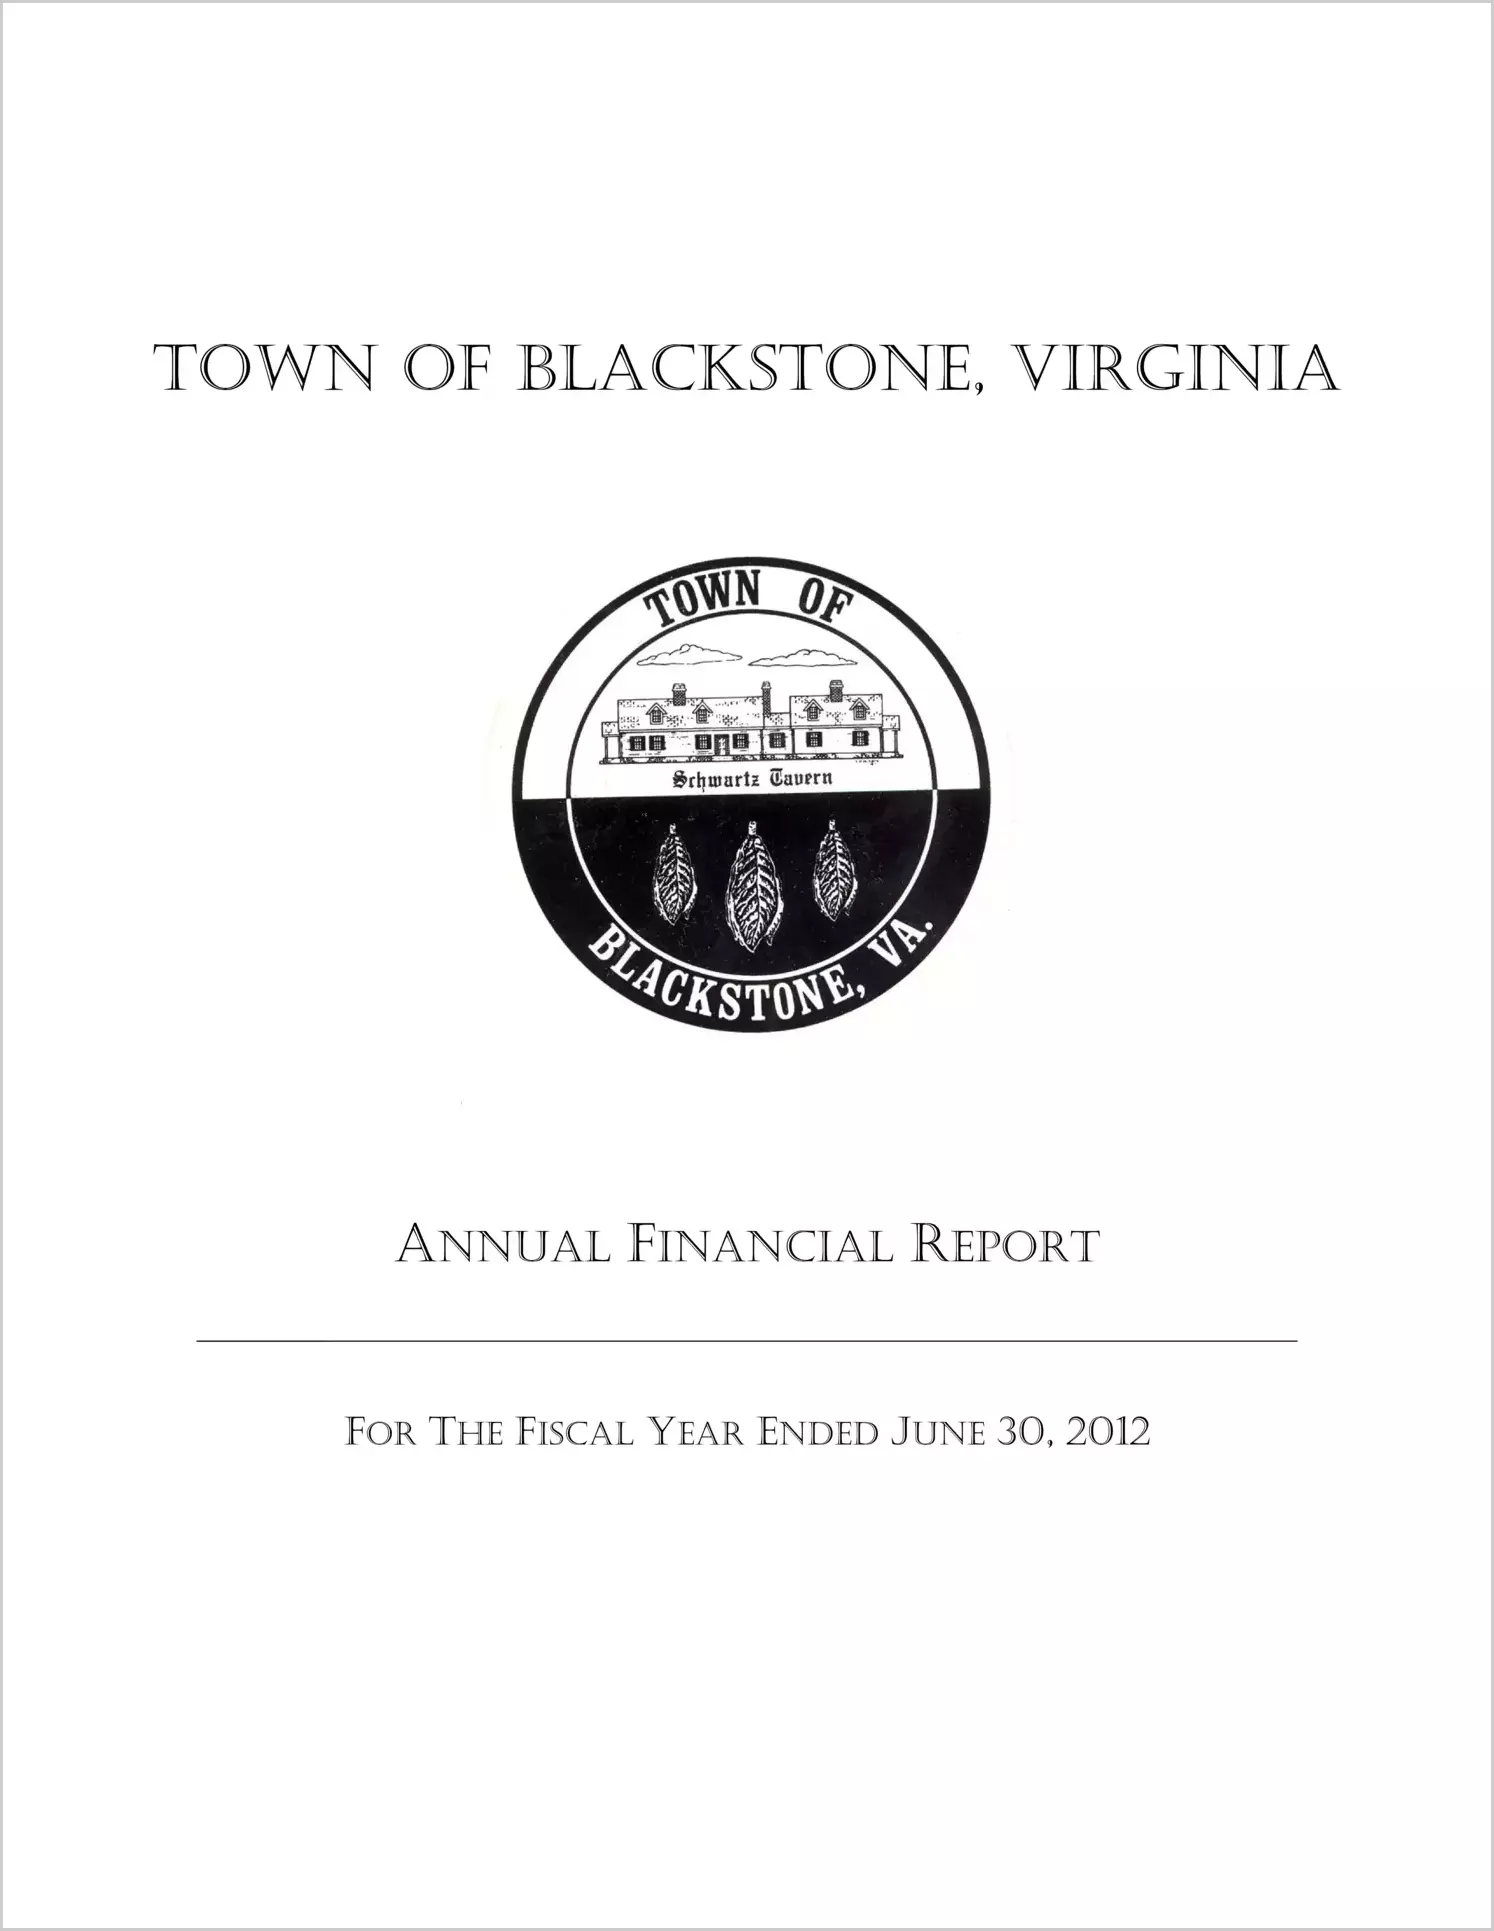 2012 Annual Financial Report for Town of Blackstone